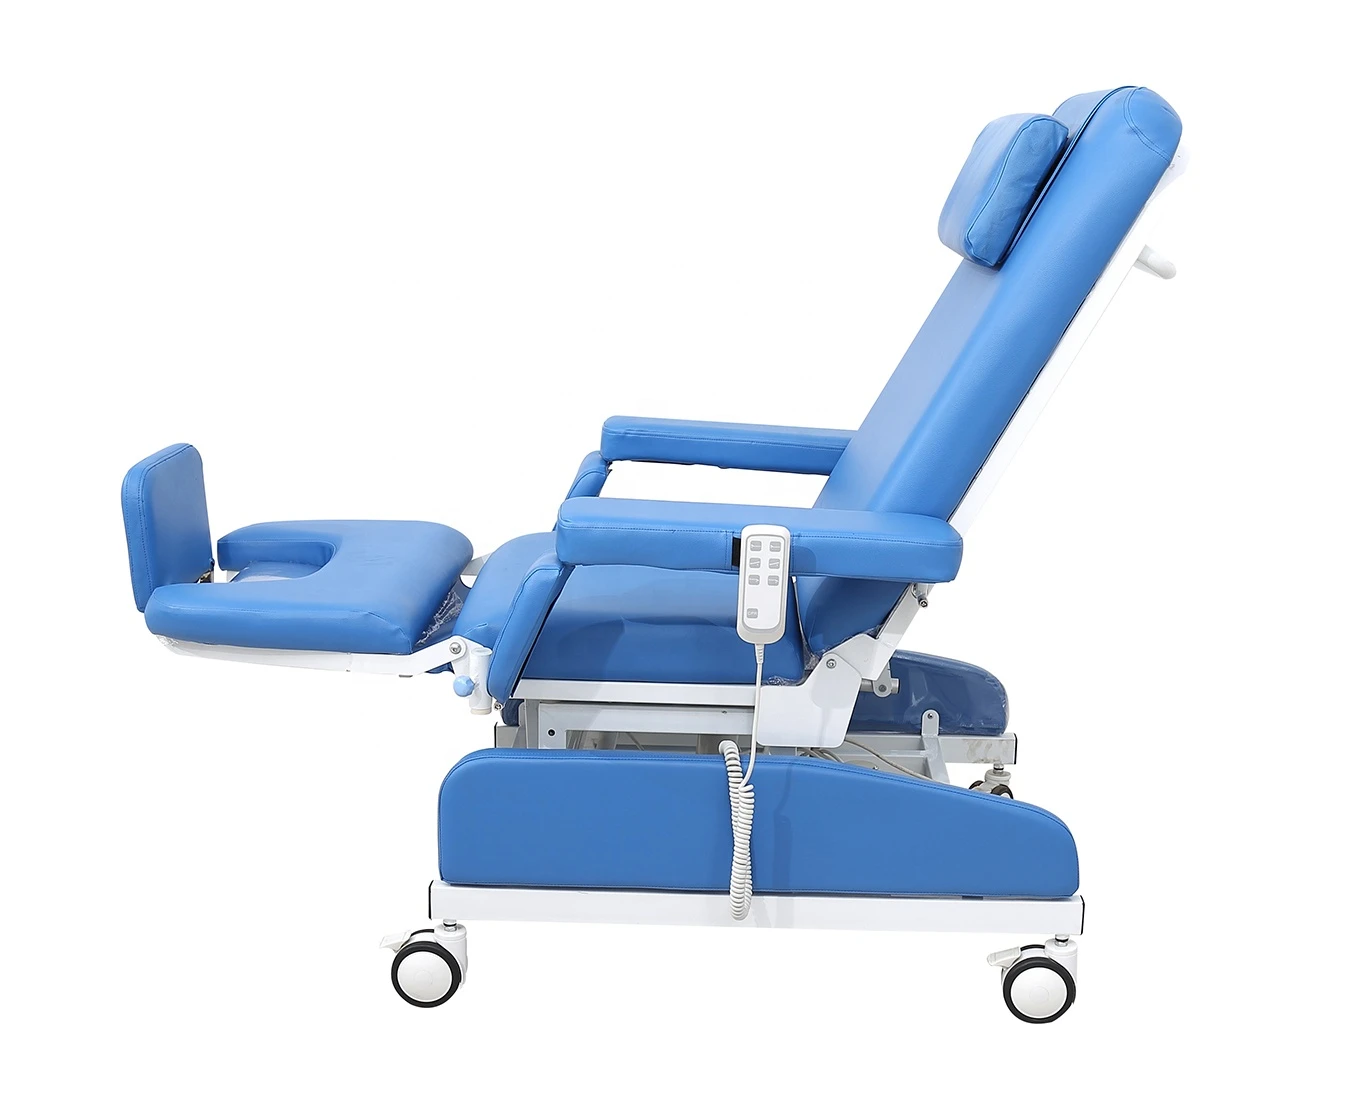 BT-DY015  With Standard blue  Viny Upholstery Motor control Electric Dialysis Chair with optional IV Pole